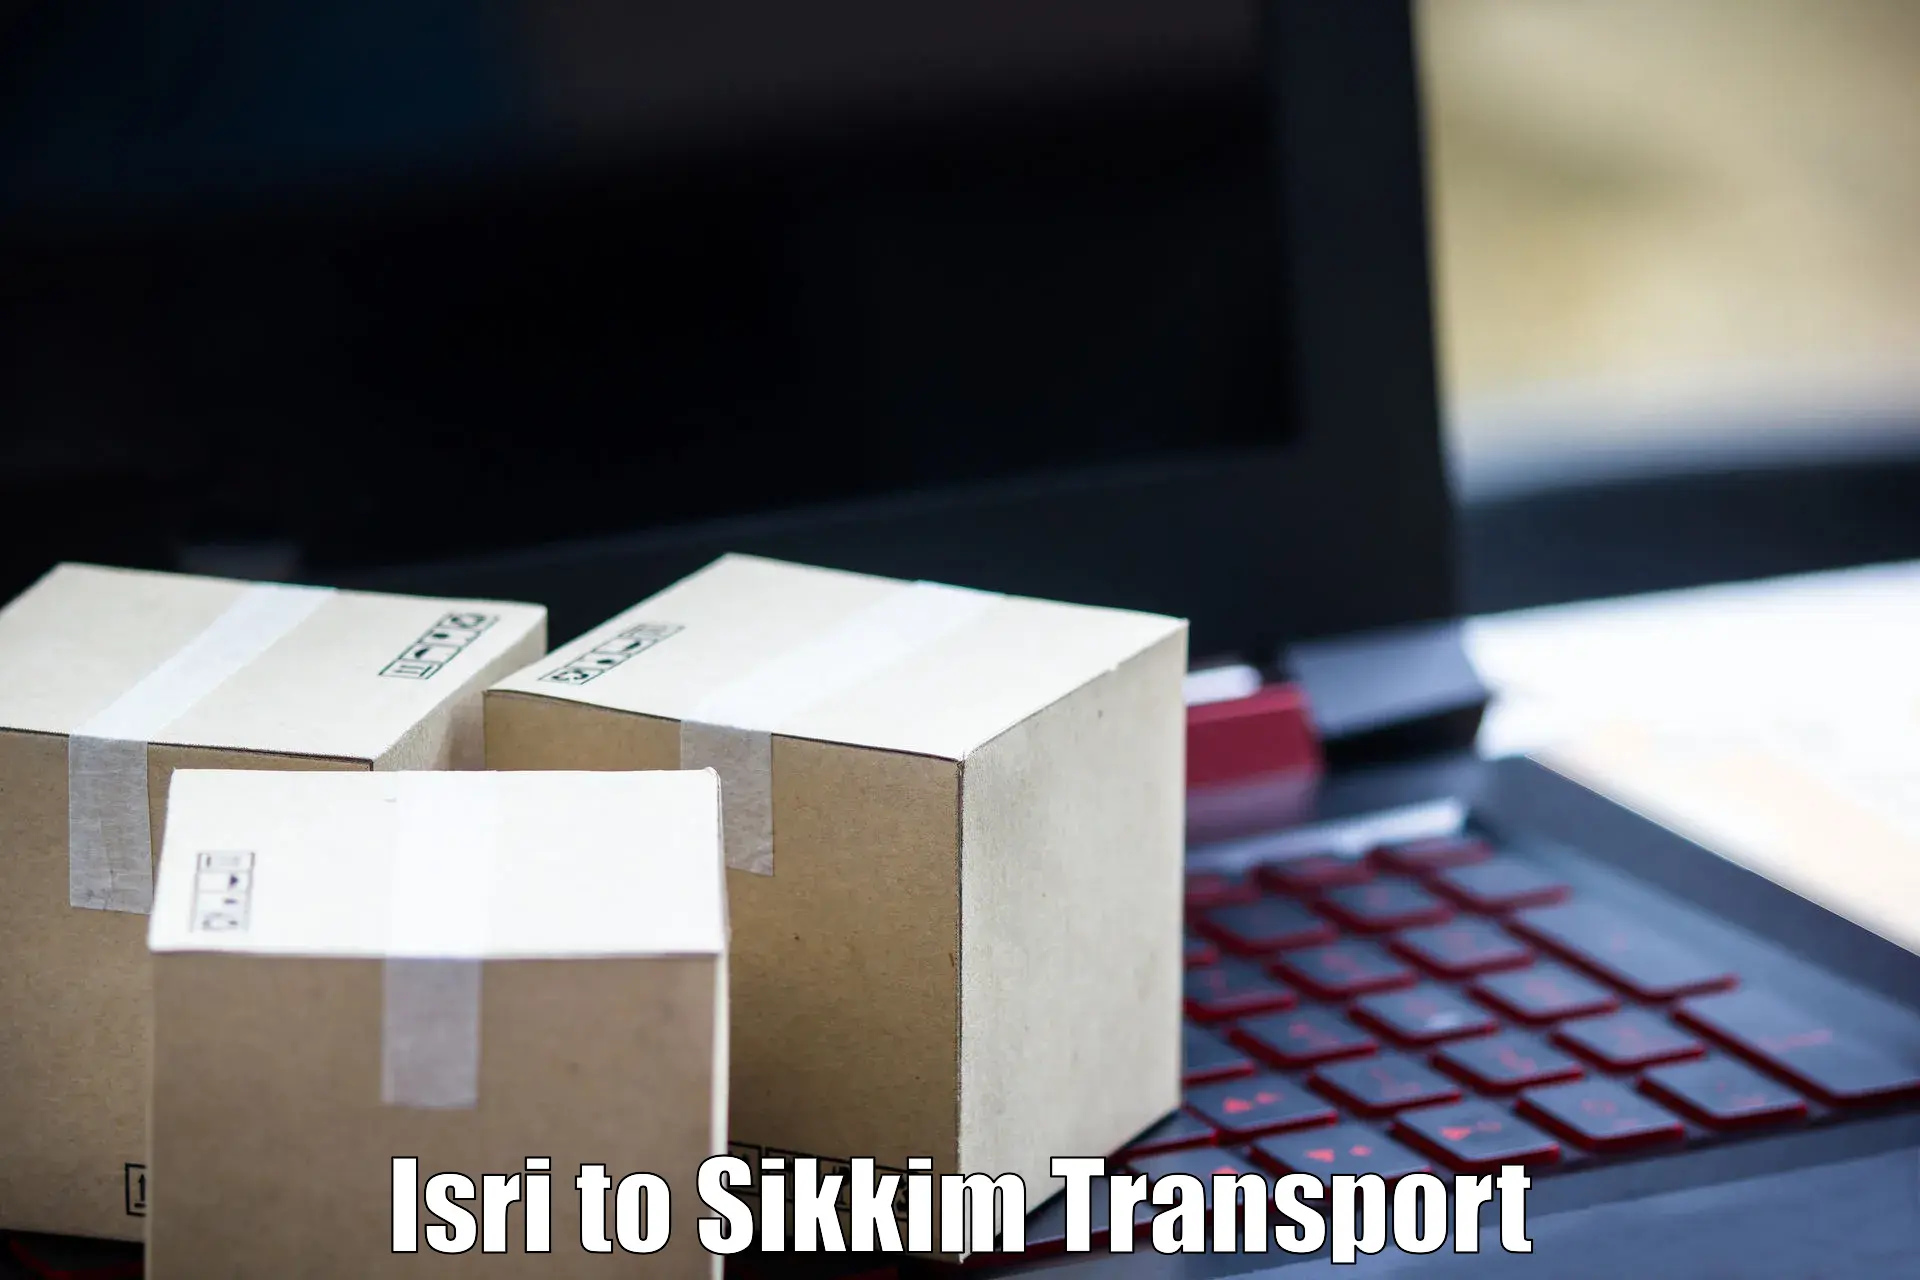 Lorry transport service Isri to South Sikkim